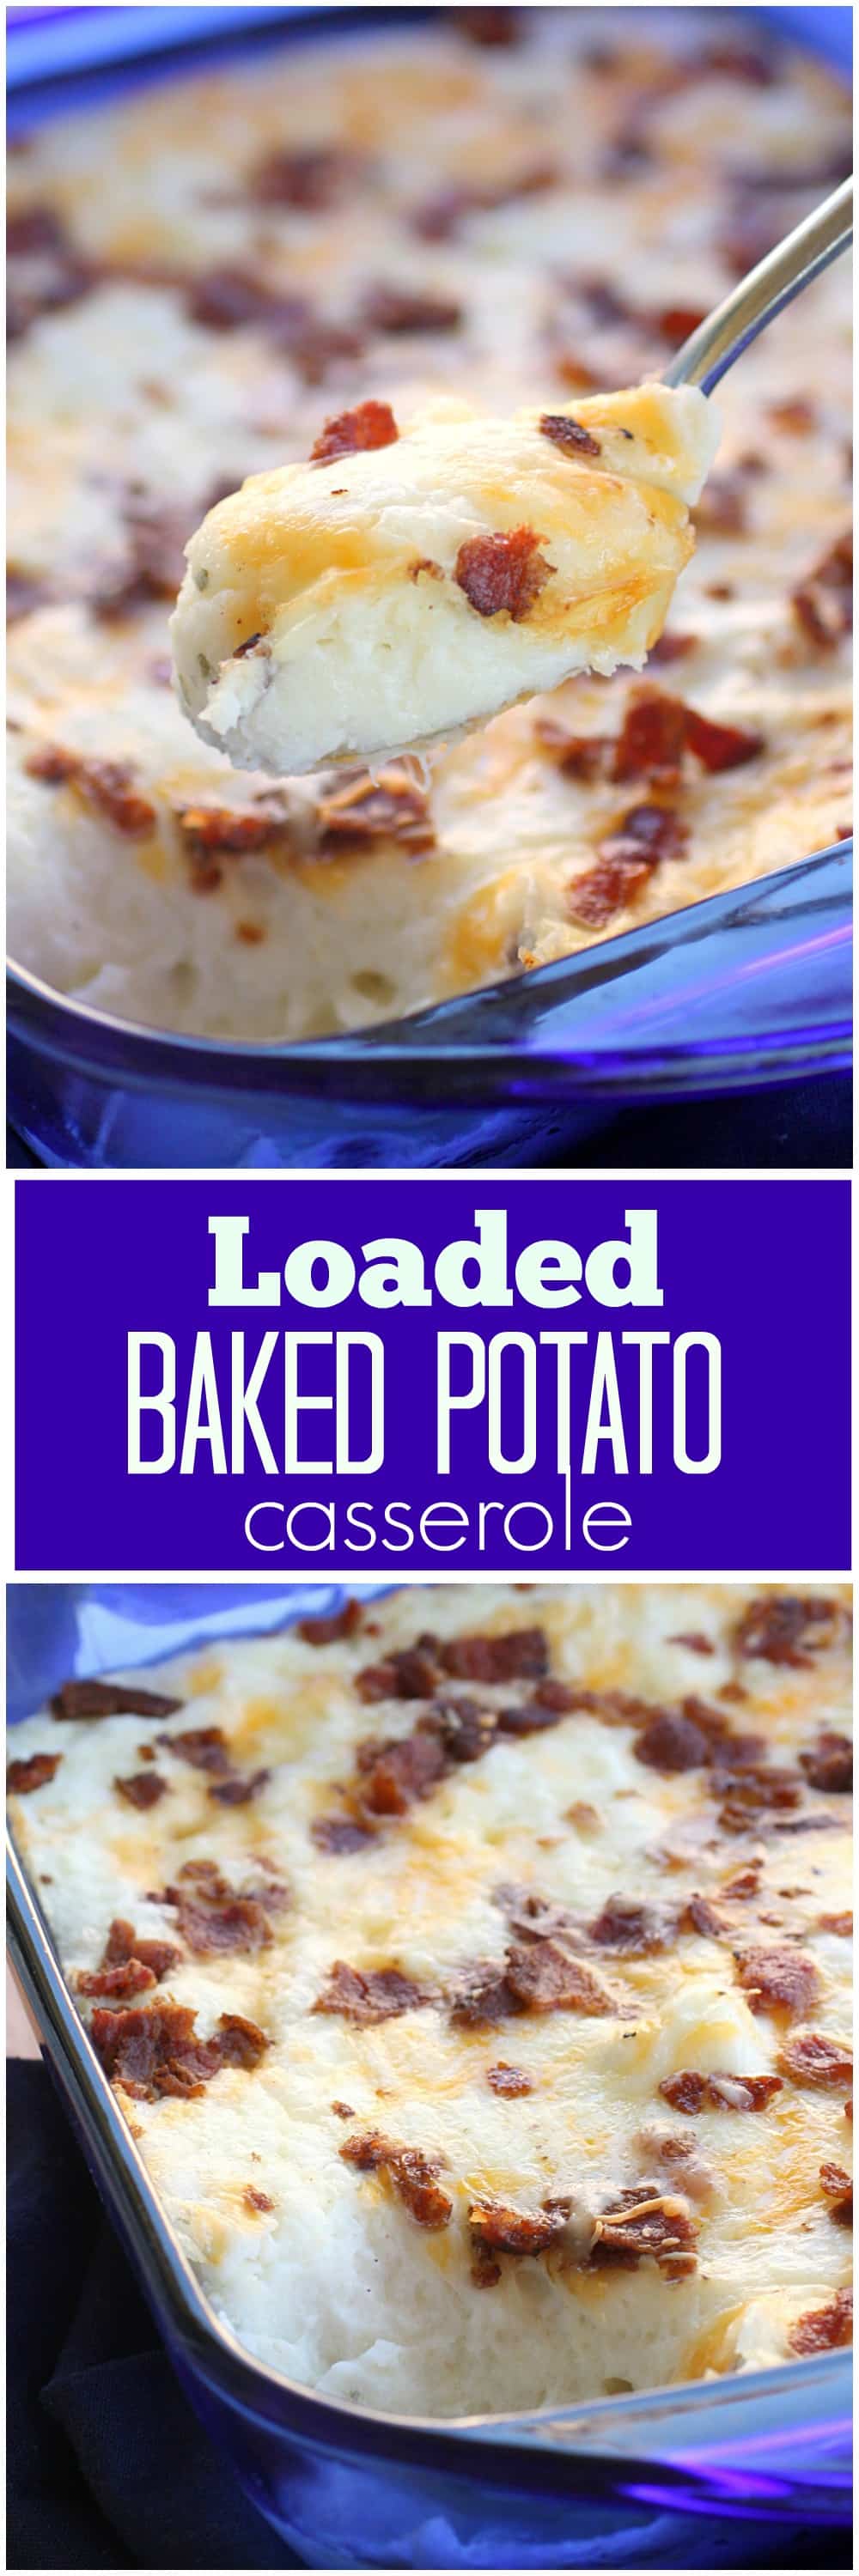 Loaded Baked Potato Casserole - creamy and full of everything you would find in a baked potato. #loaded #mashed #potato #casserole #thanksgiving #easter #recipe #sidedish